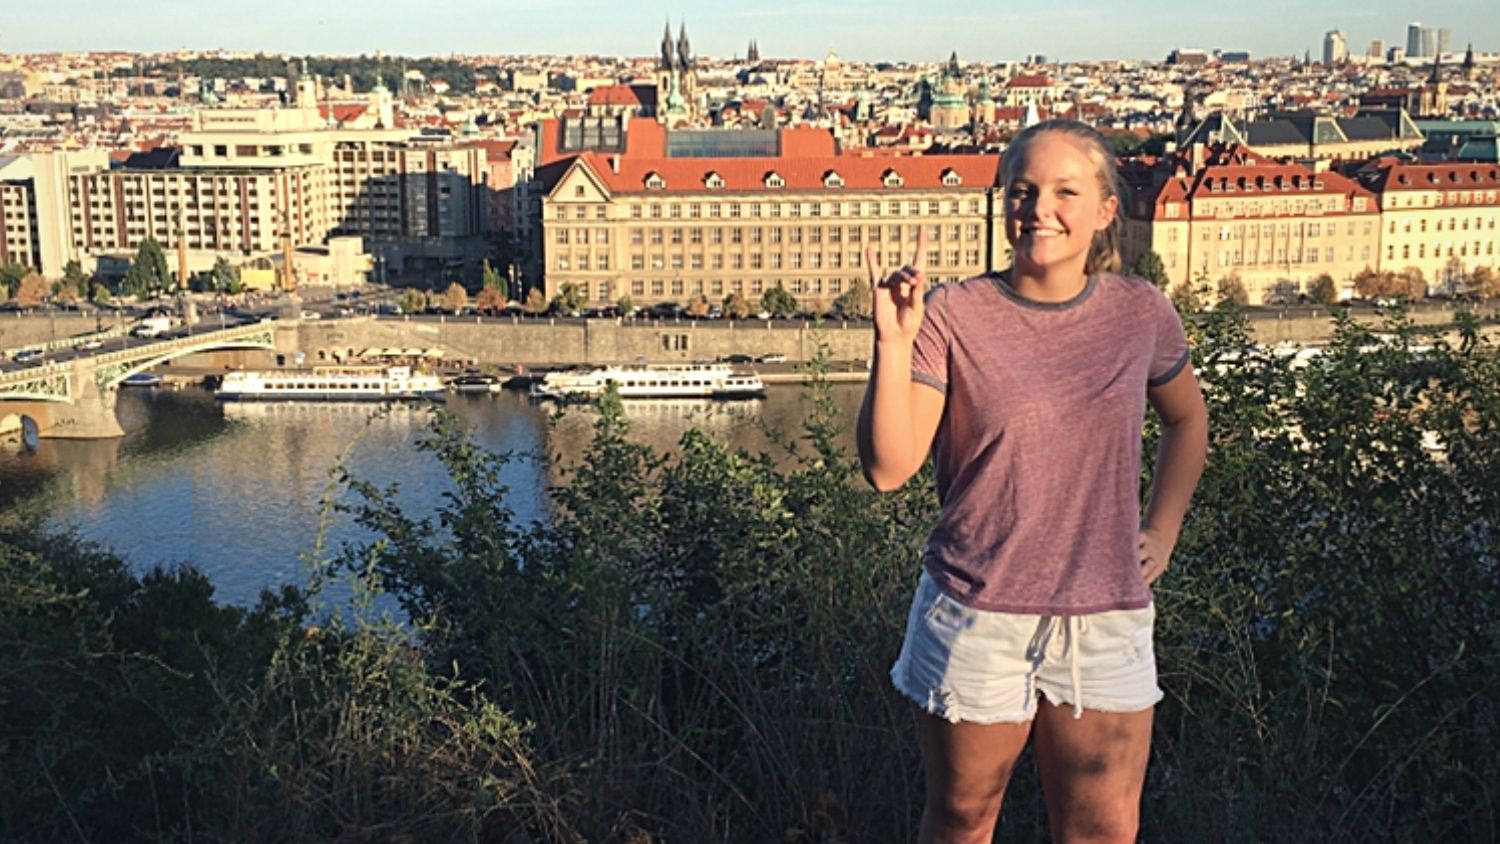 A student, Shea, making a wolfie with her hand with Prague's rooftops in the background.